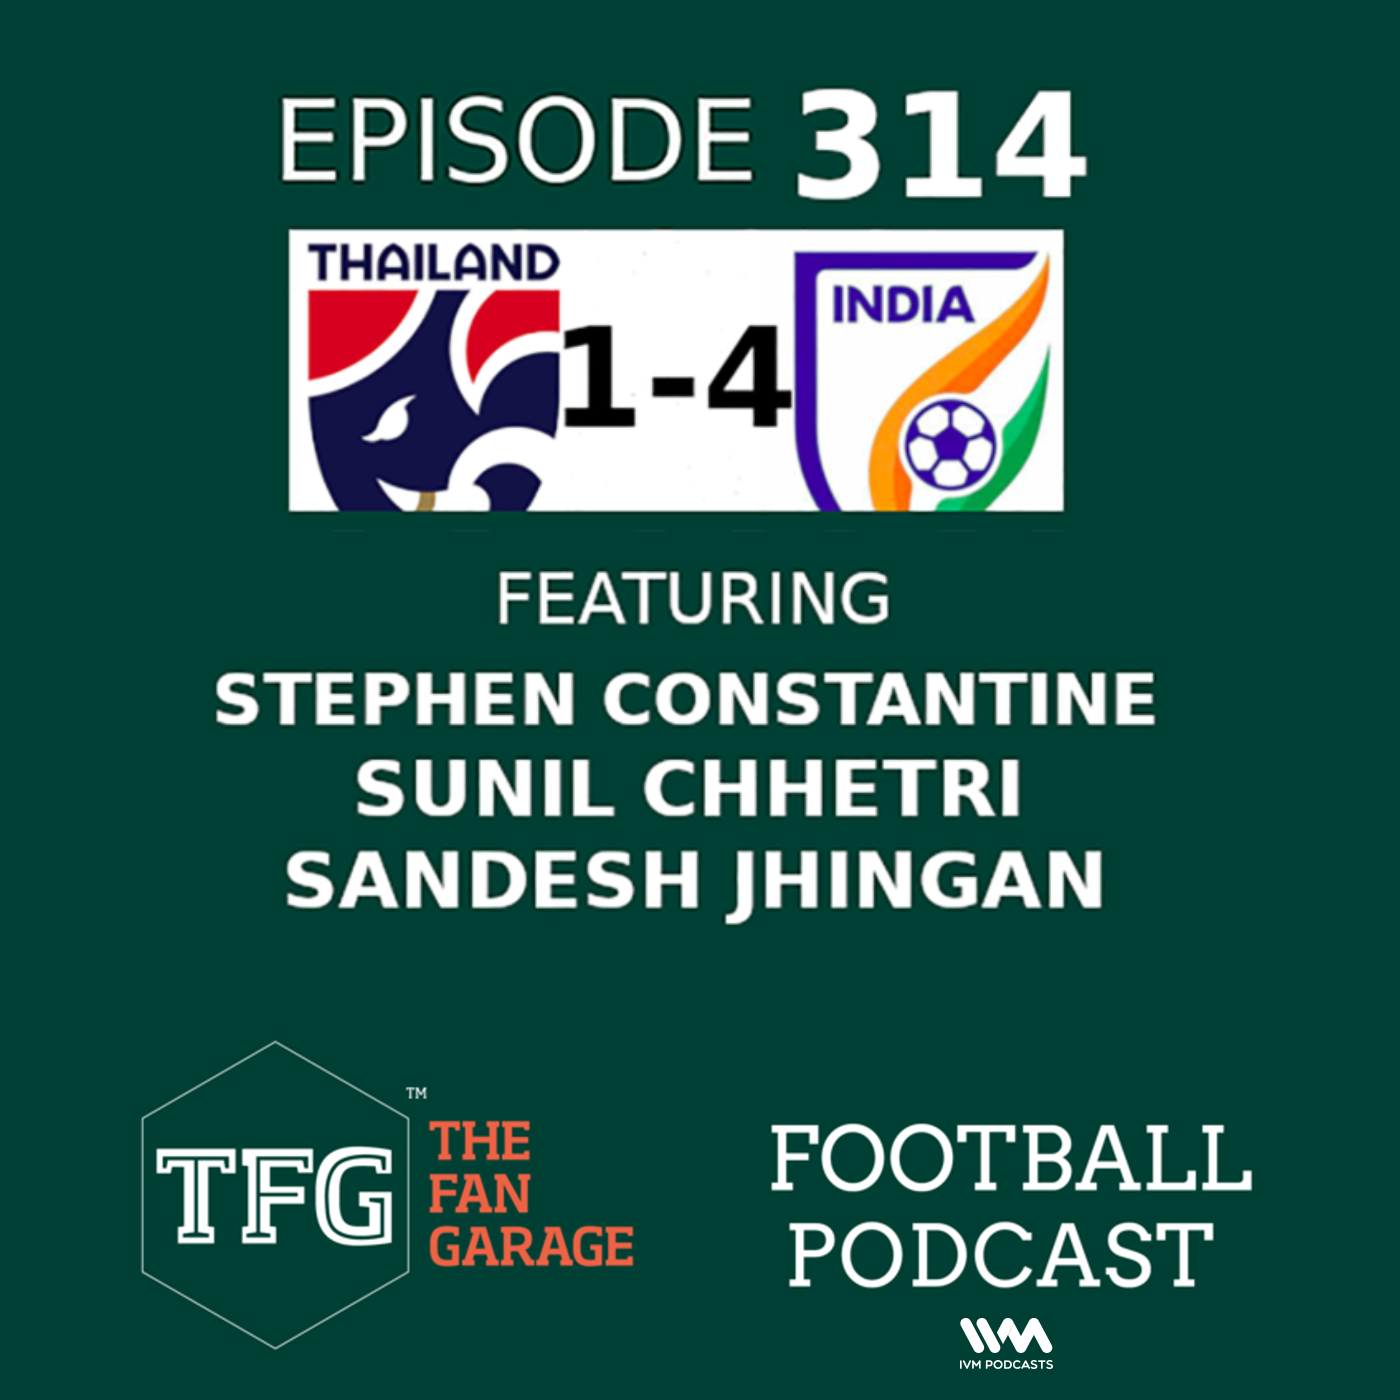 TFG Indian Football Ep. 314: India dismantle Thailand at Asian Cup